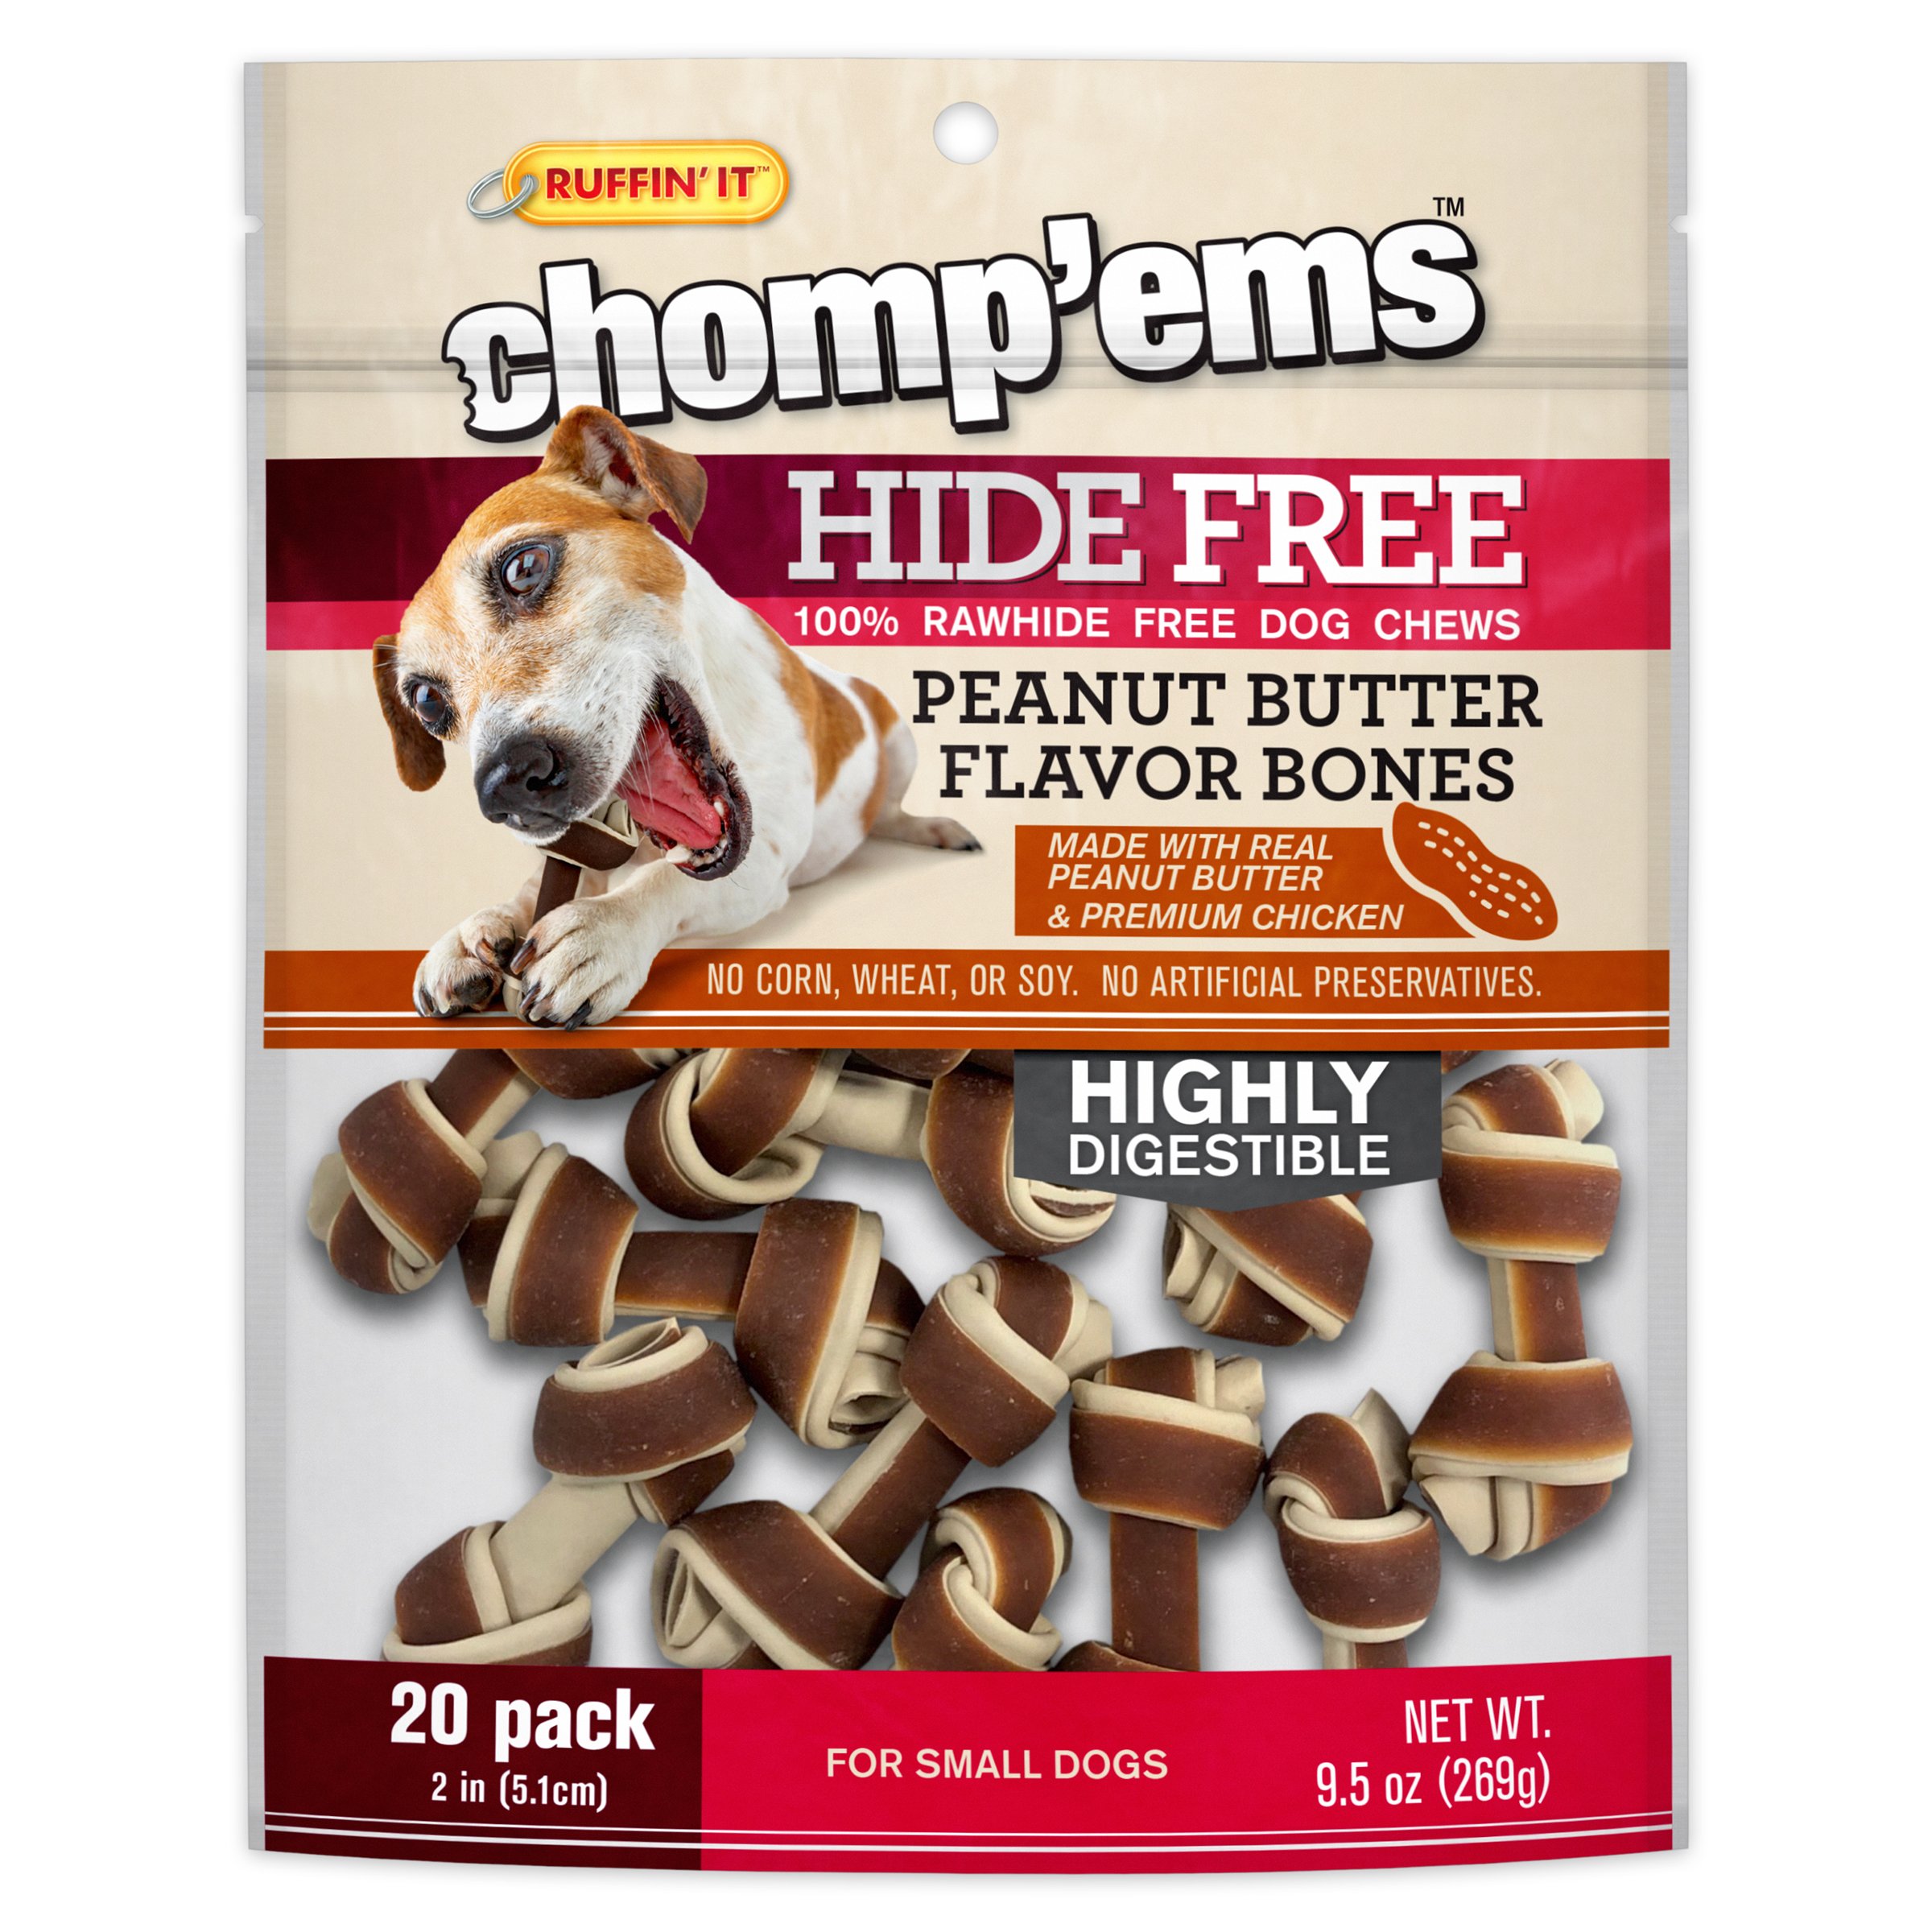 Peanut Butter for Dogs. A Sticky Subject